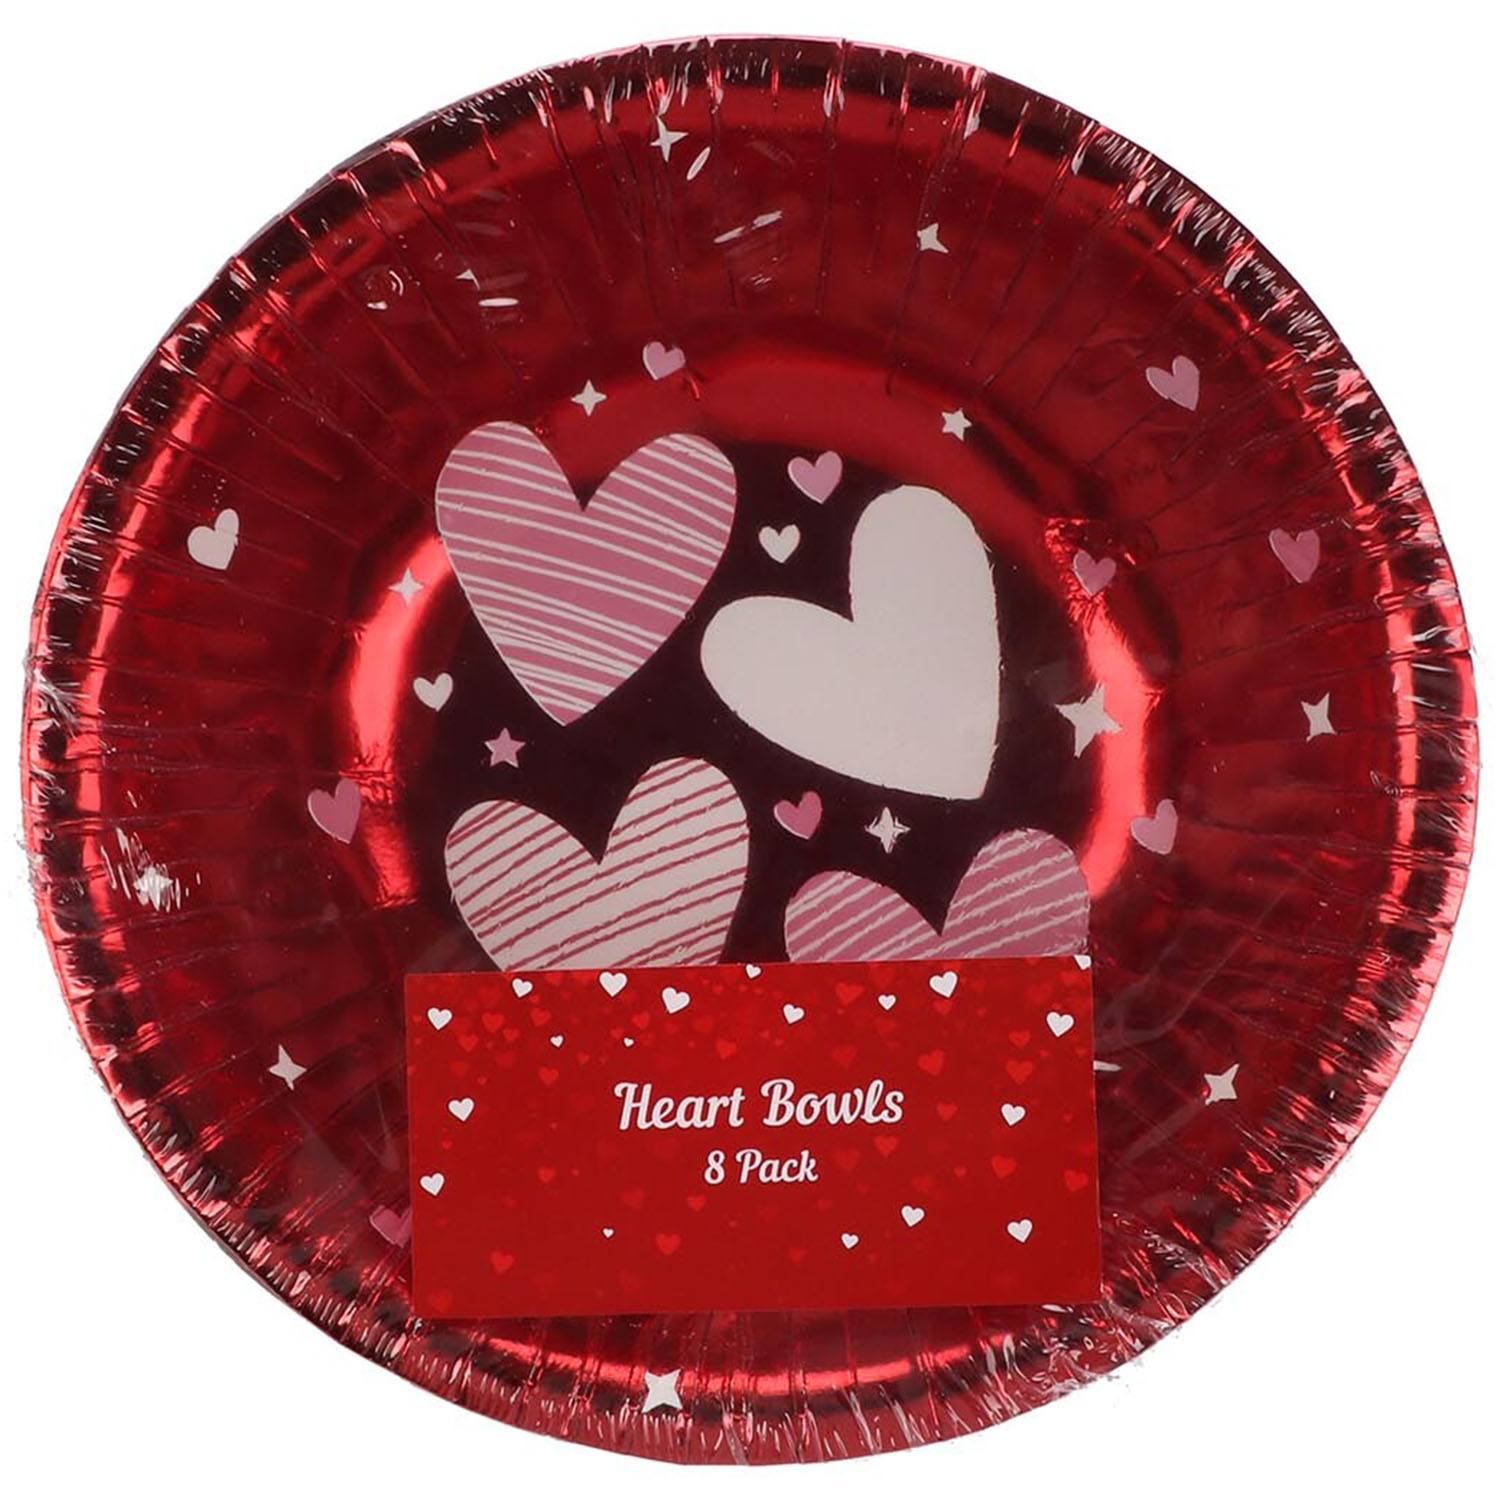 Pack of 8 Heart Bowls - Red Image 1